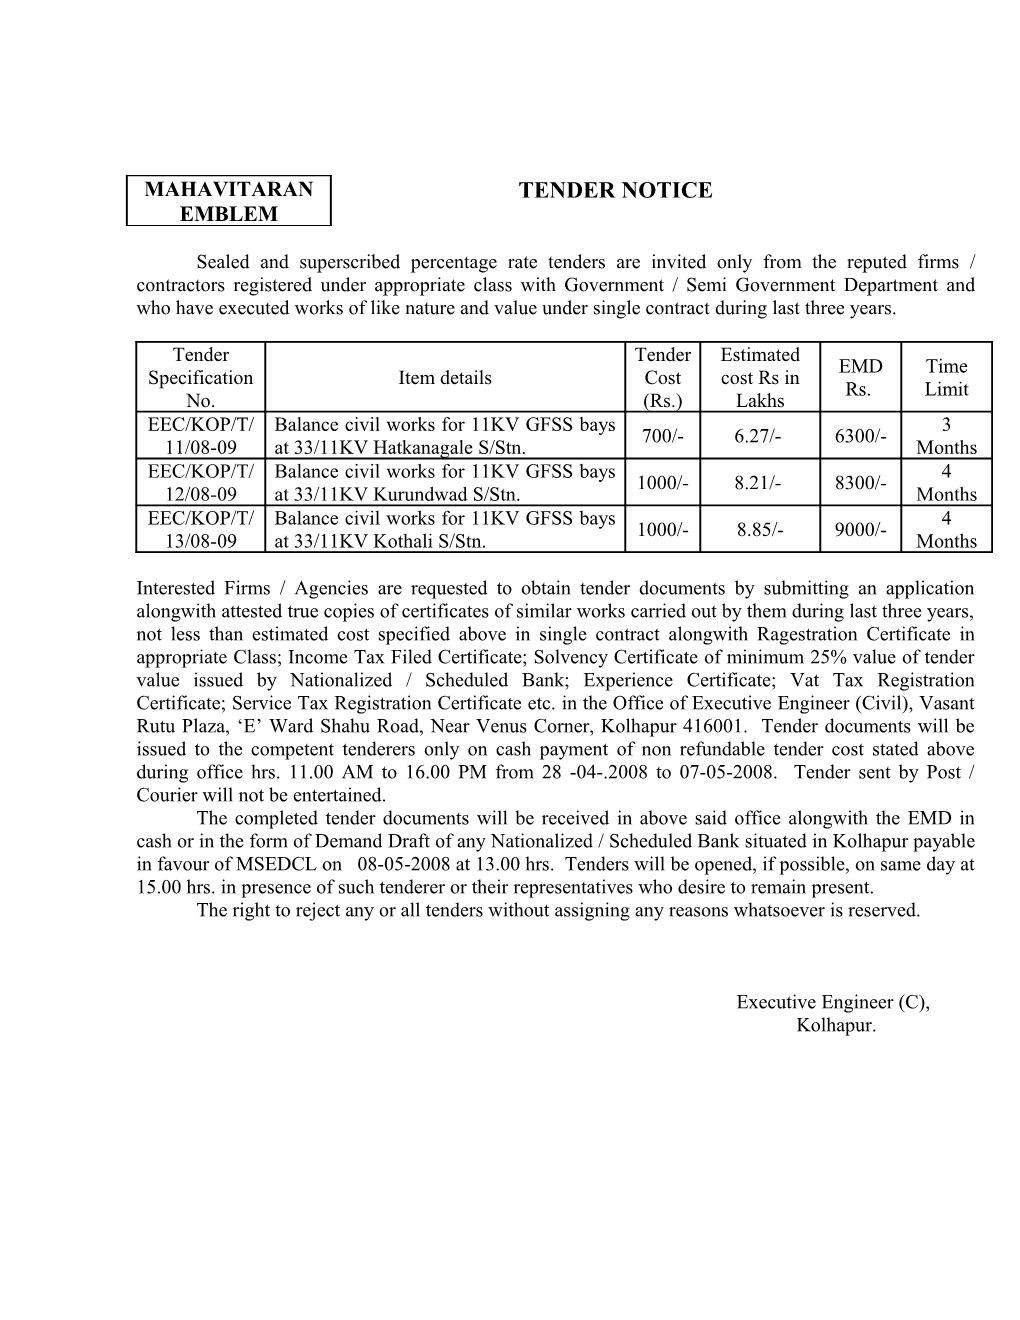 Sealed and Superscribed Percentage Rate Tenders Are Invited Only from the Reputed Firms s2